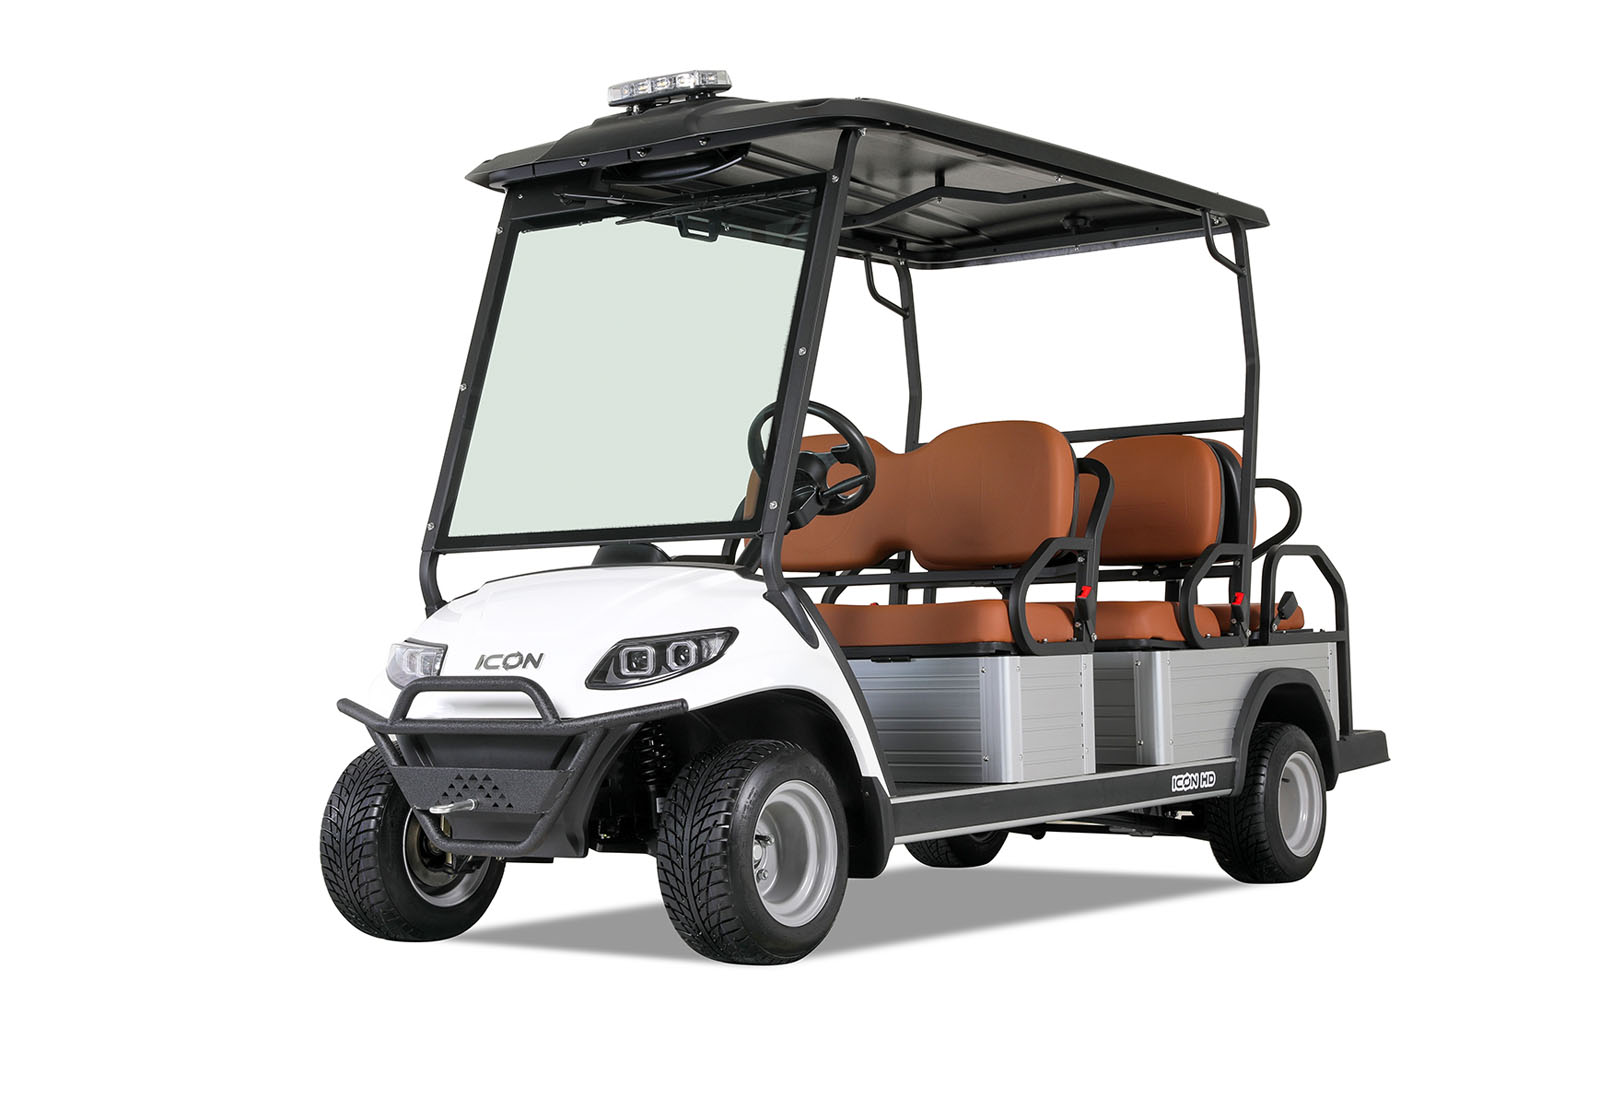 ICON Golf Cart i60-HD Features